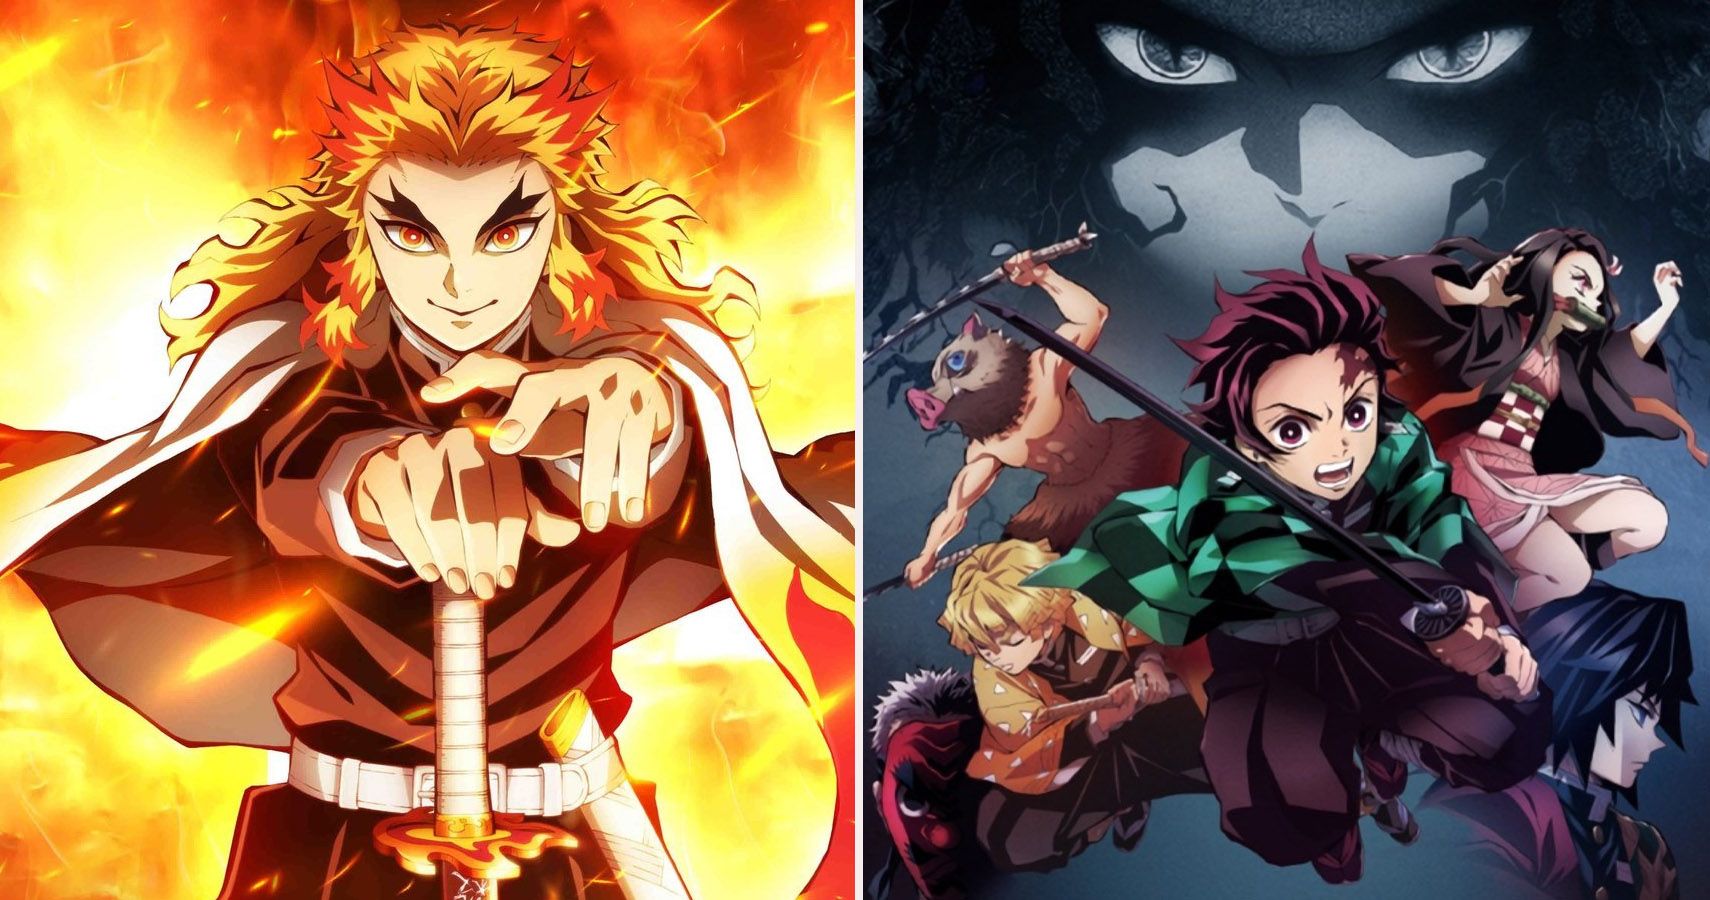 Demon Slayer: 10 Things To Look For In The New Movie